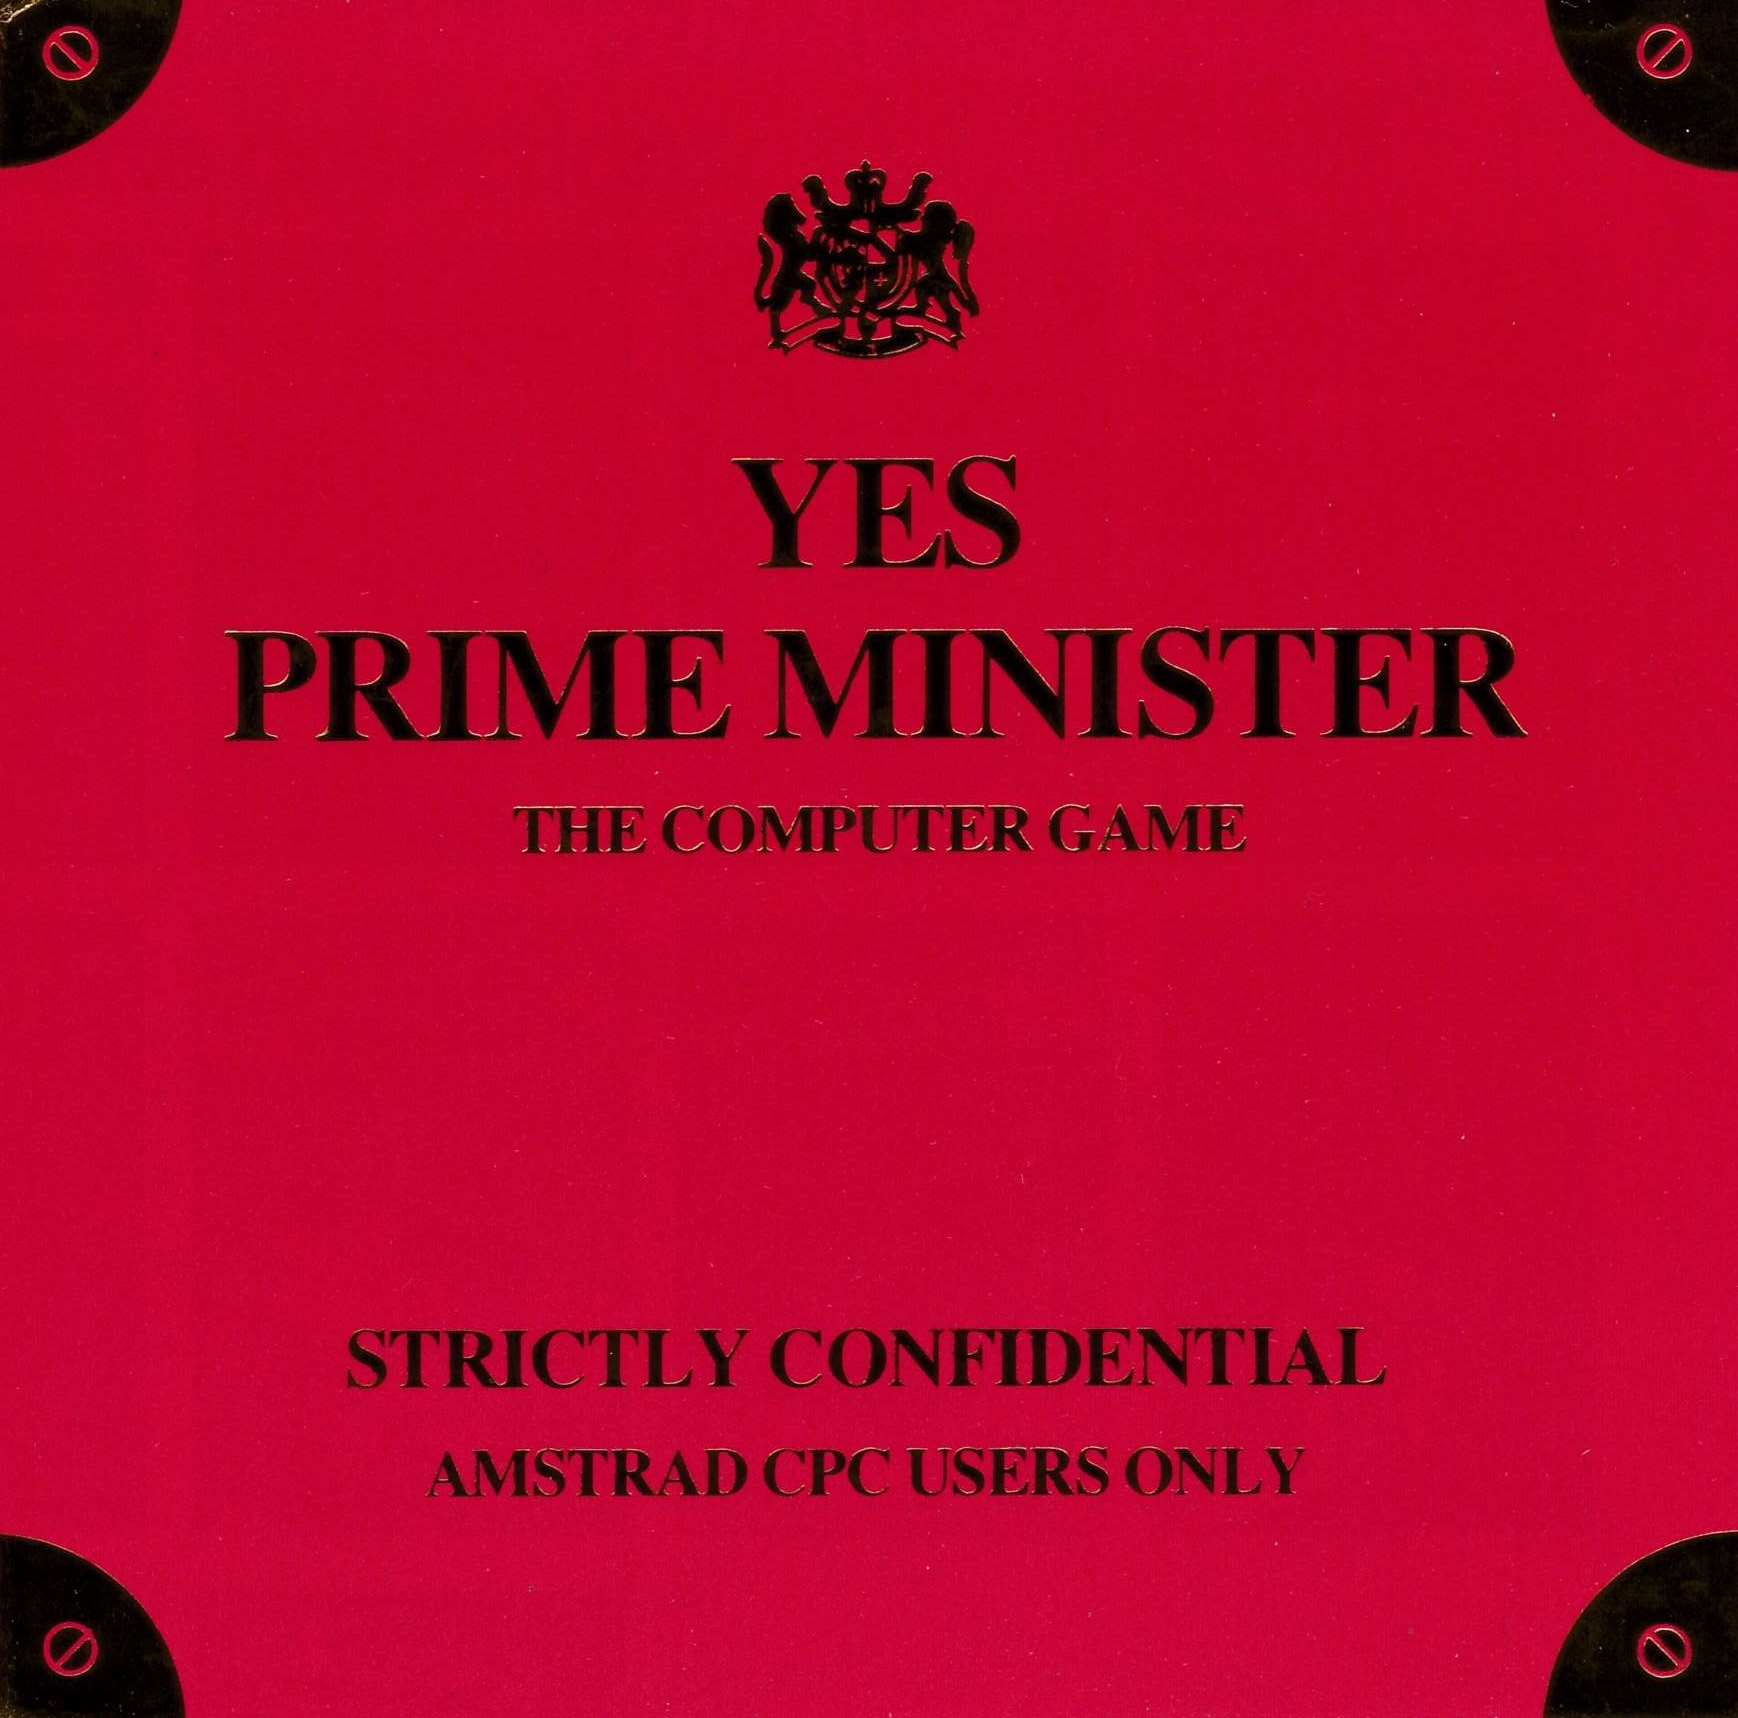 screenshot of the Amstrad CPC game Yes prime minister by GameBase CPC